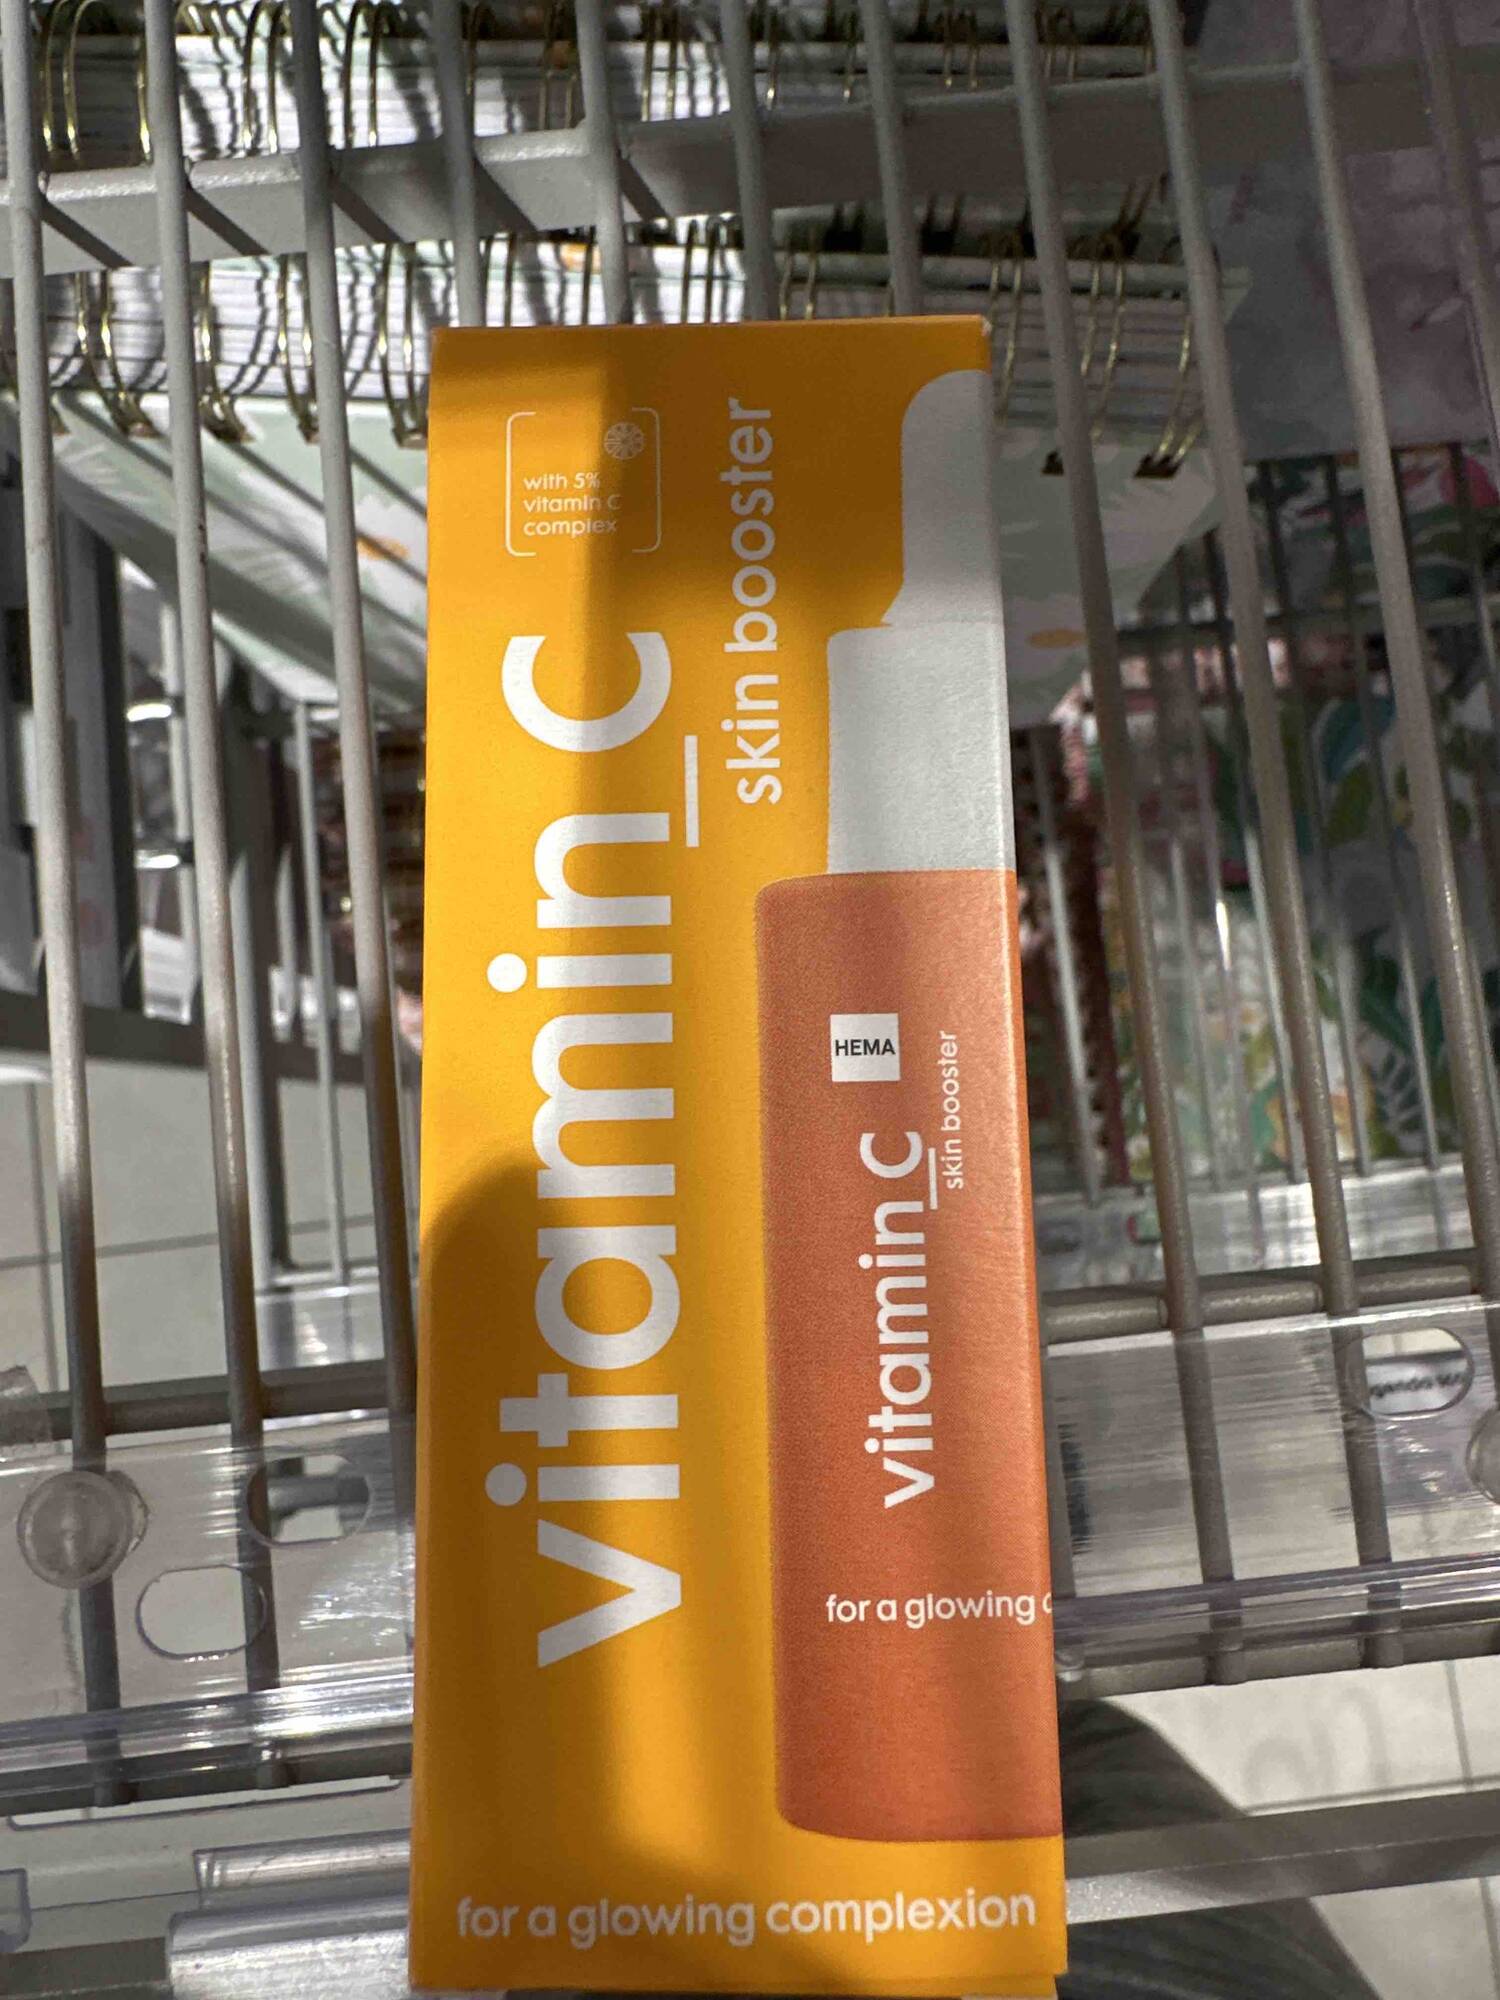 HEMA - Vitamin C - Skin booster for a glowing complexion